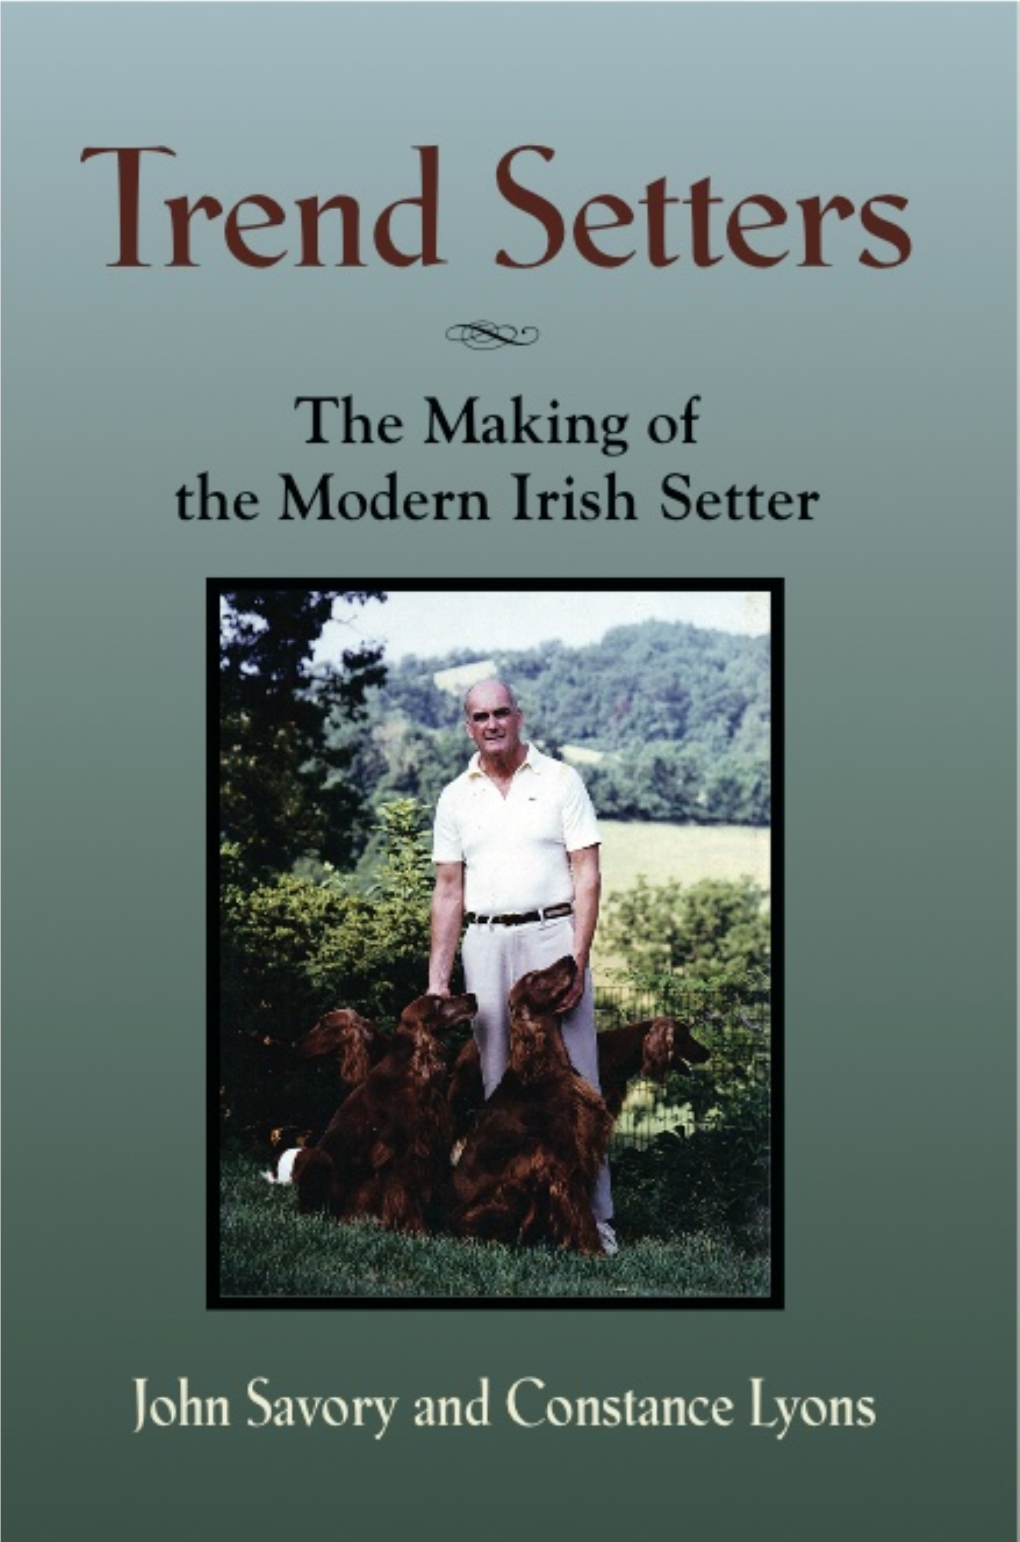 Trend Setters: the Making of the Modern Irish Setter” Flashed Onto the Screen